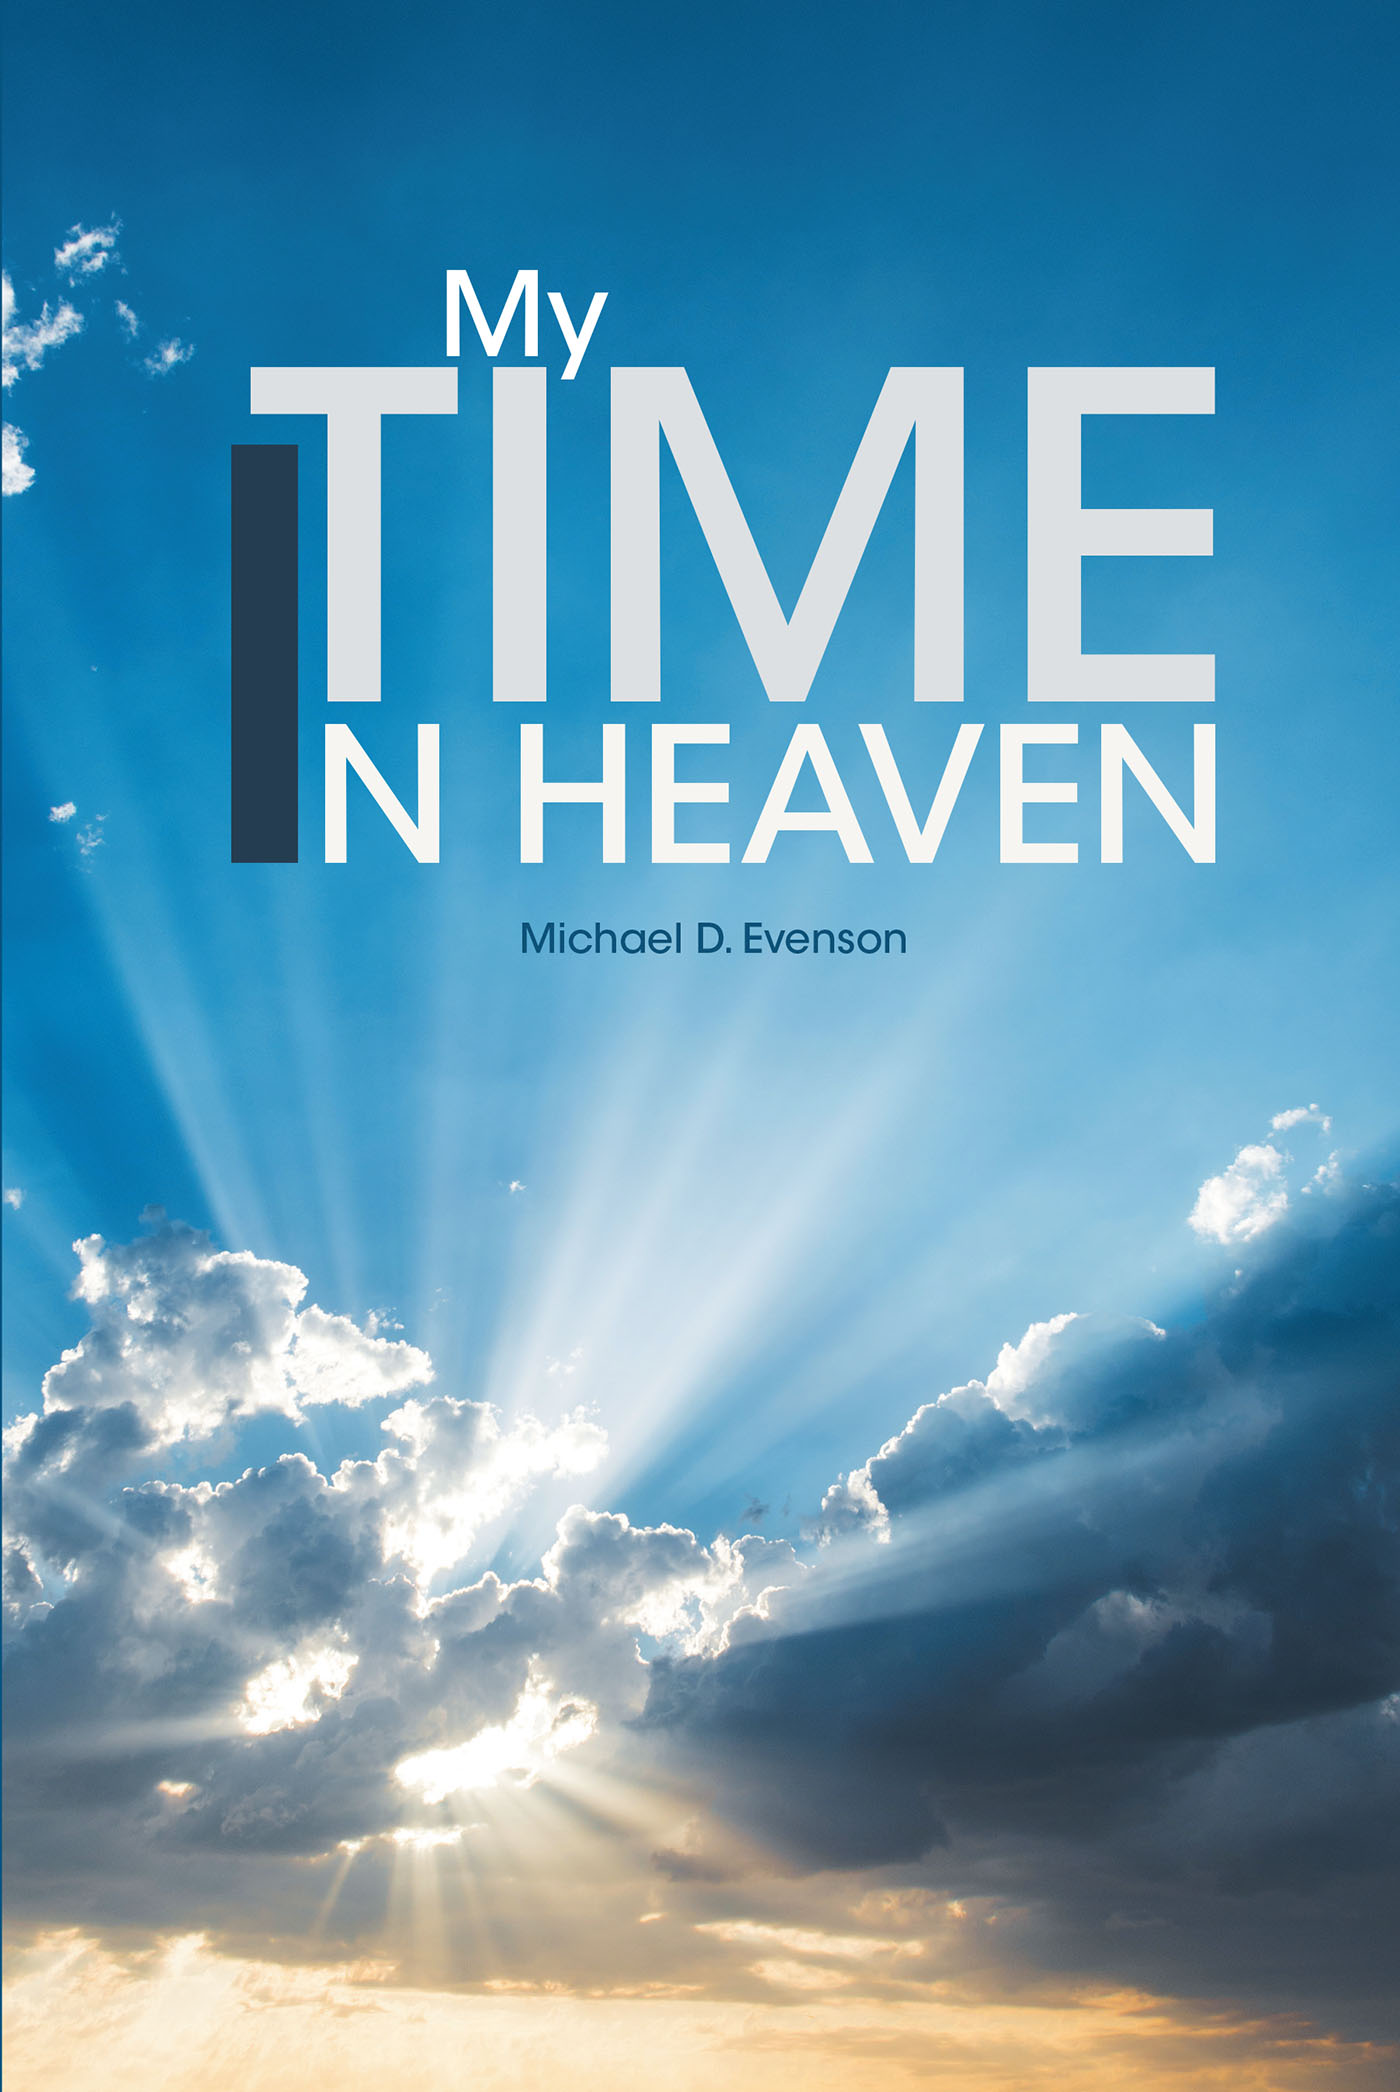 Michael D. Evenson’s New Book, "My Time in Heaven," is the Astonishing First-Hand Account of the Author’s Time Spent in Heaven and the Miraculous Powers It Gave Him